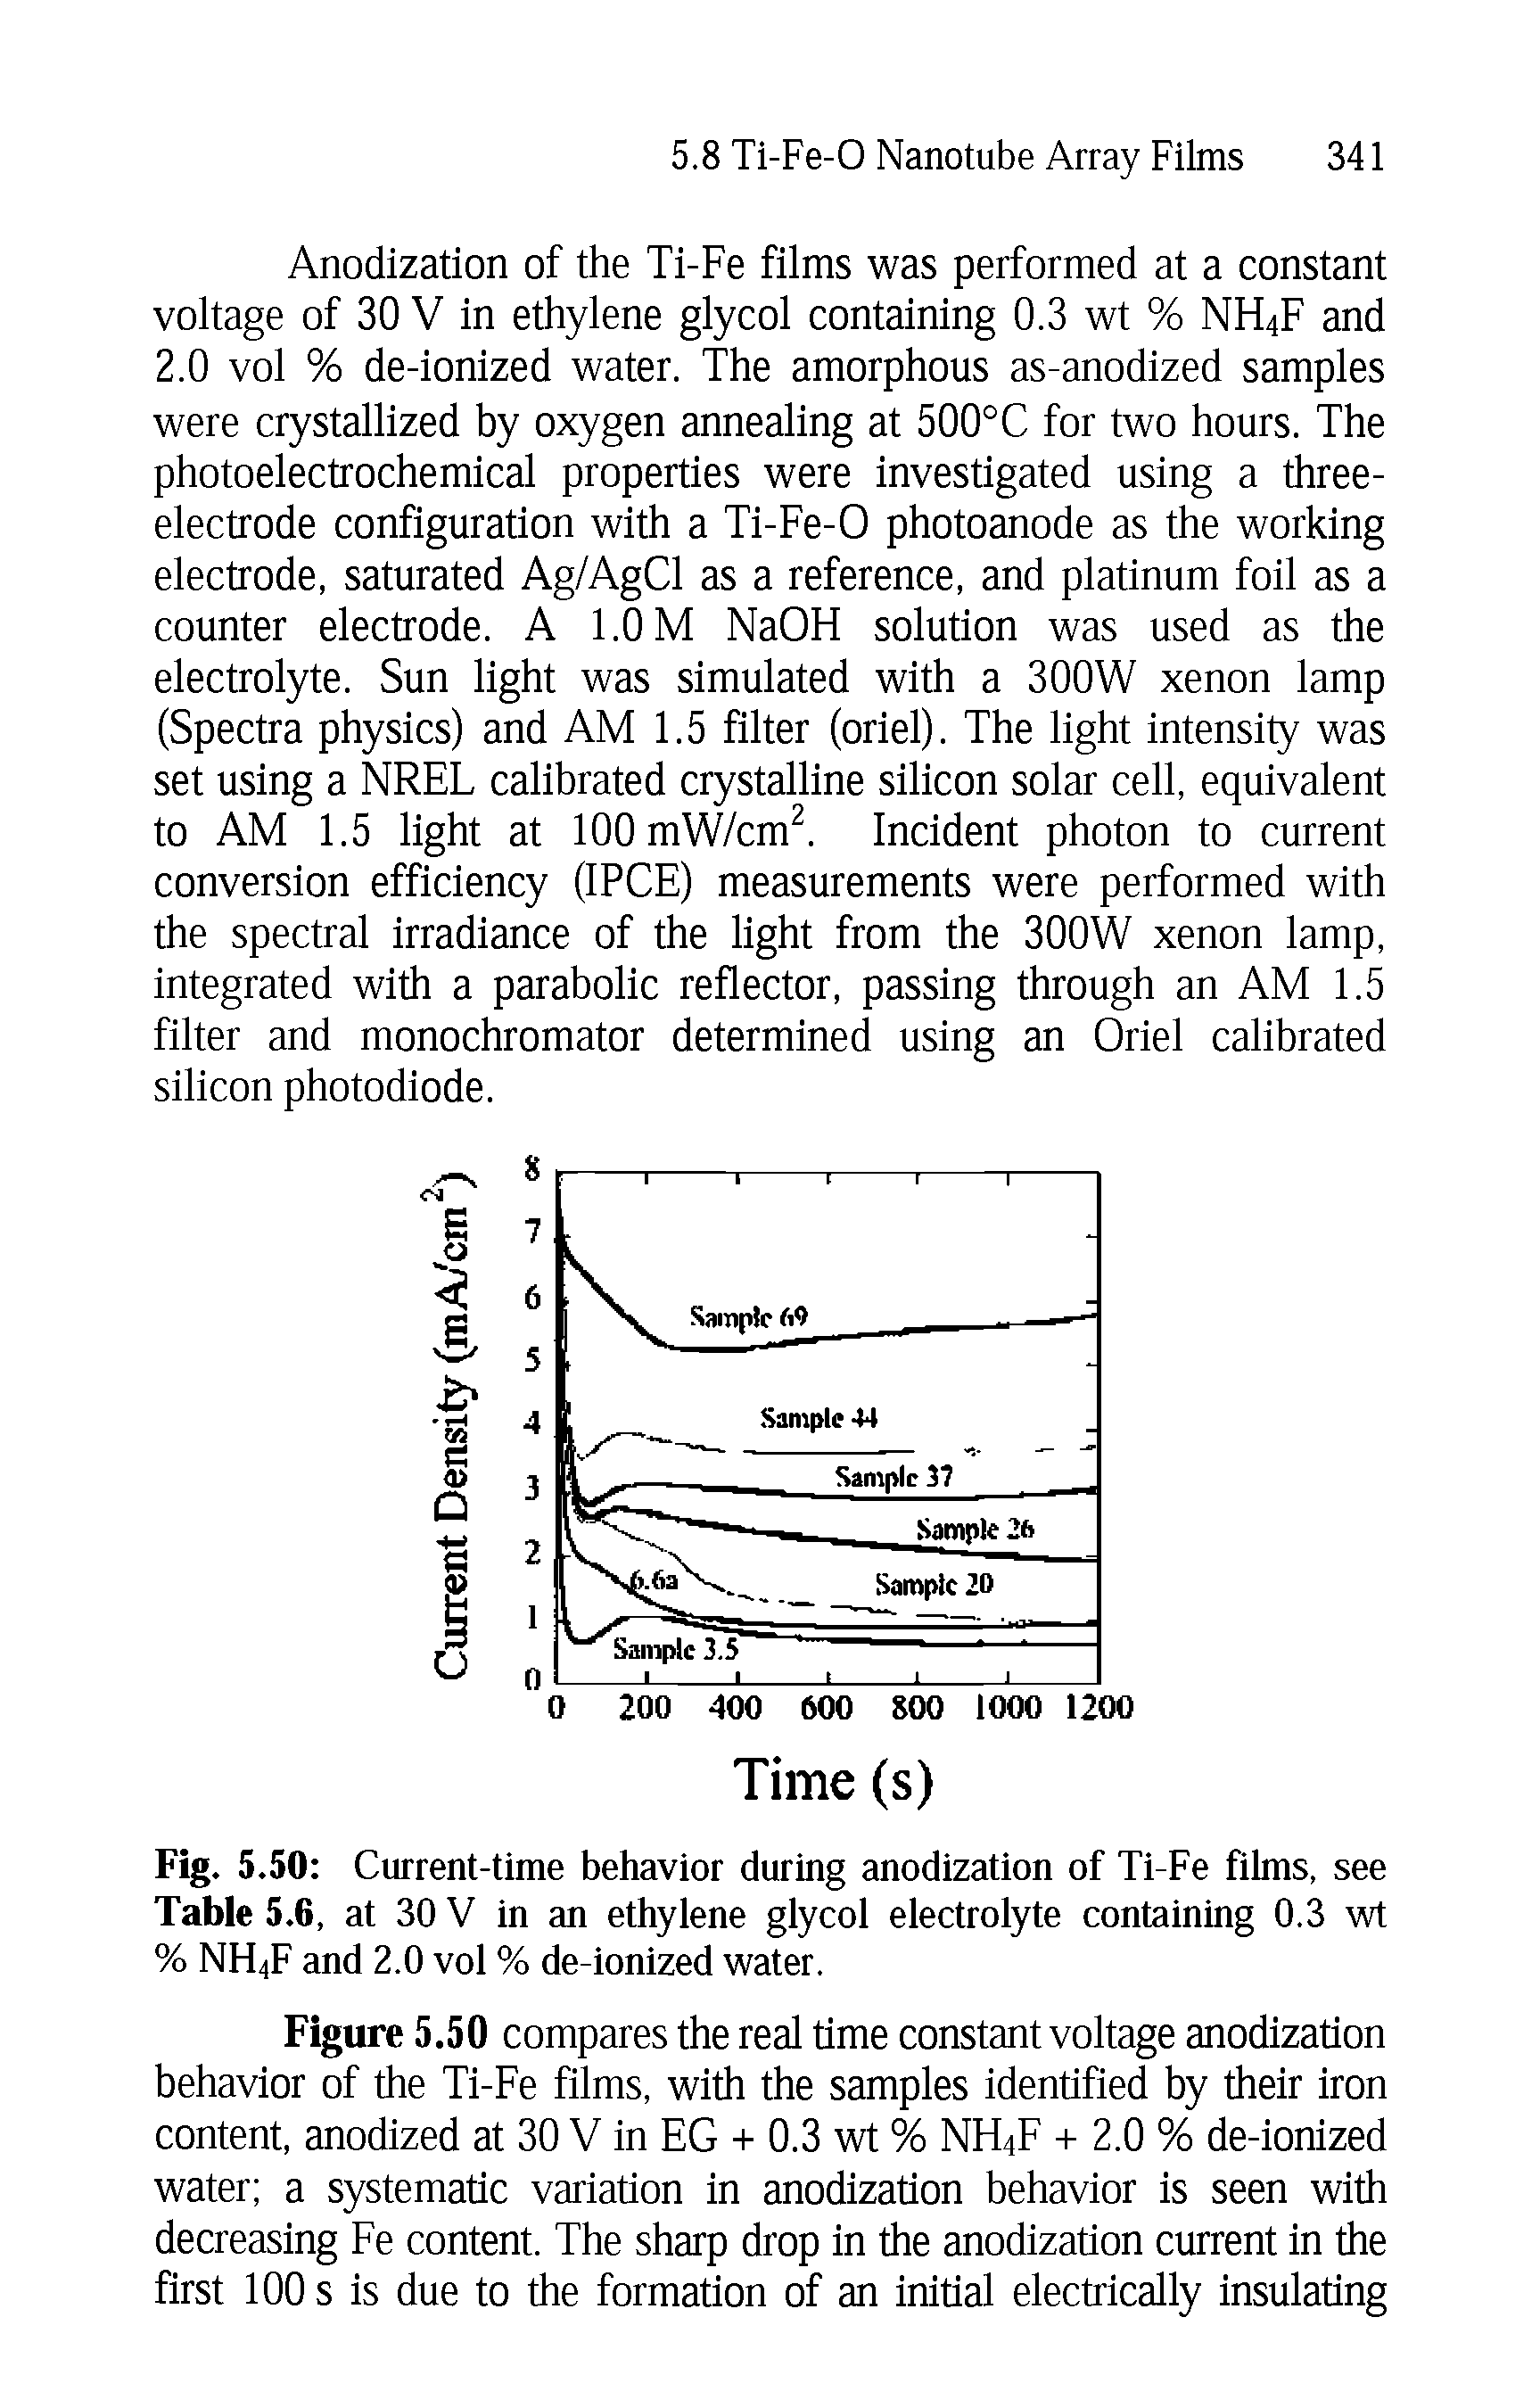 Fig. 5.50 Current-time behavior during anodization of Ti-Fe films, see Table 5.6, at 30 V in an ethylene glycol electrolyte containing 0.3 wt % NH4F and 2.0 vol % de-ionized water.